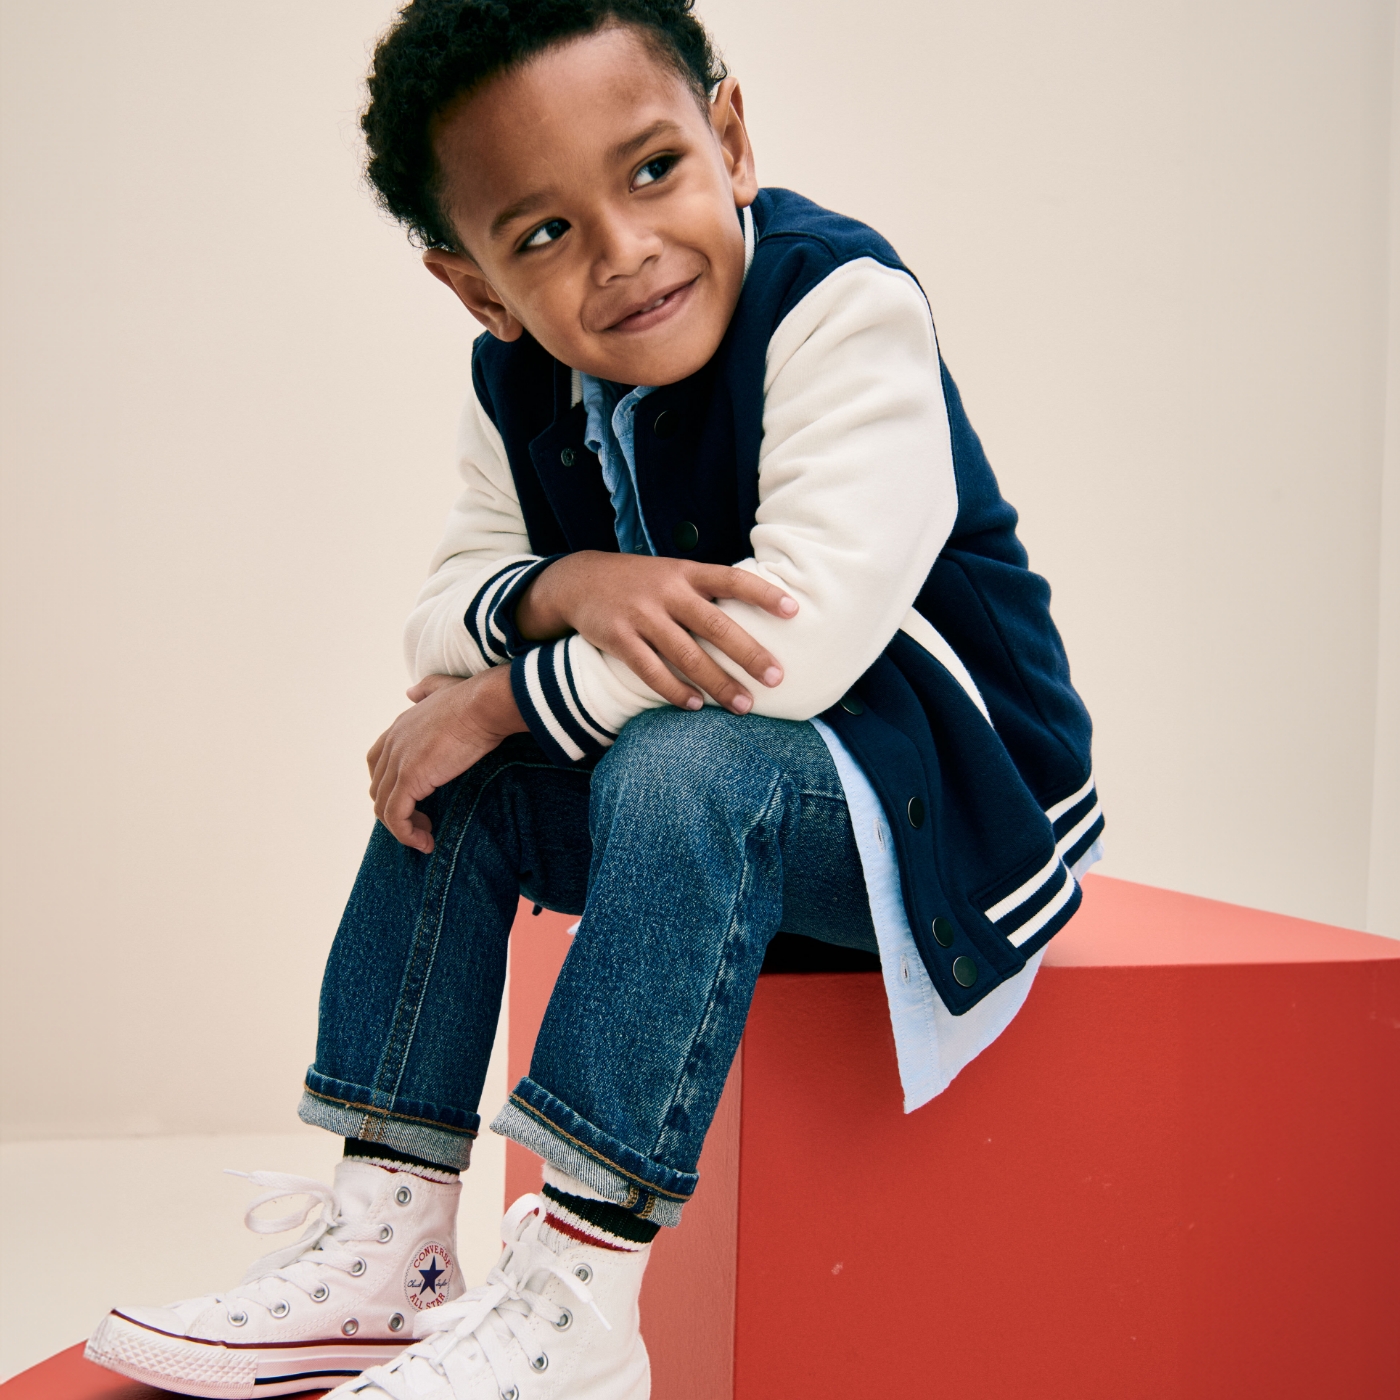 A toddler boy dressed in jeans, a letterman jacket, and hightop sneakers.